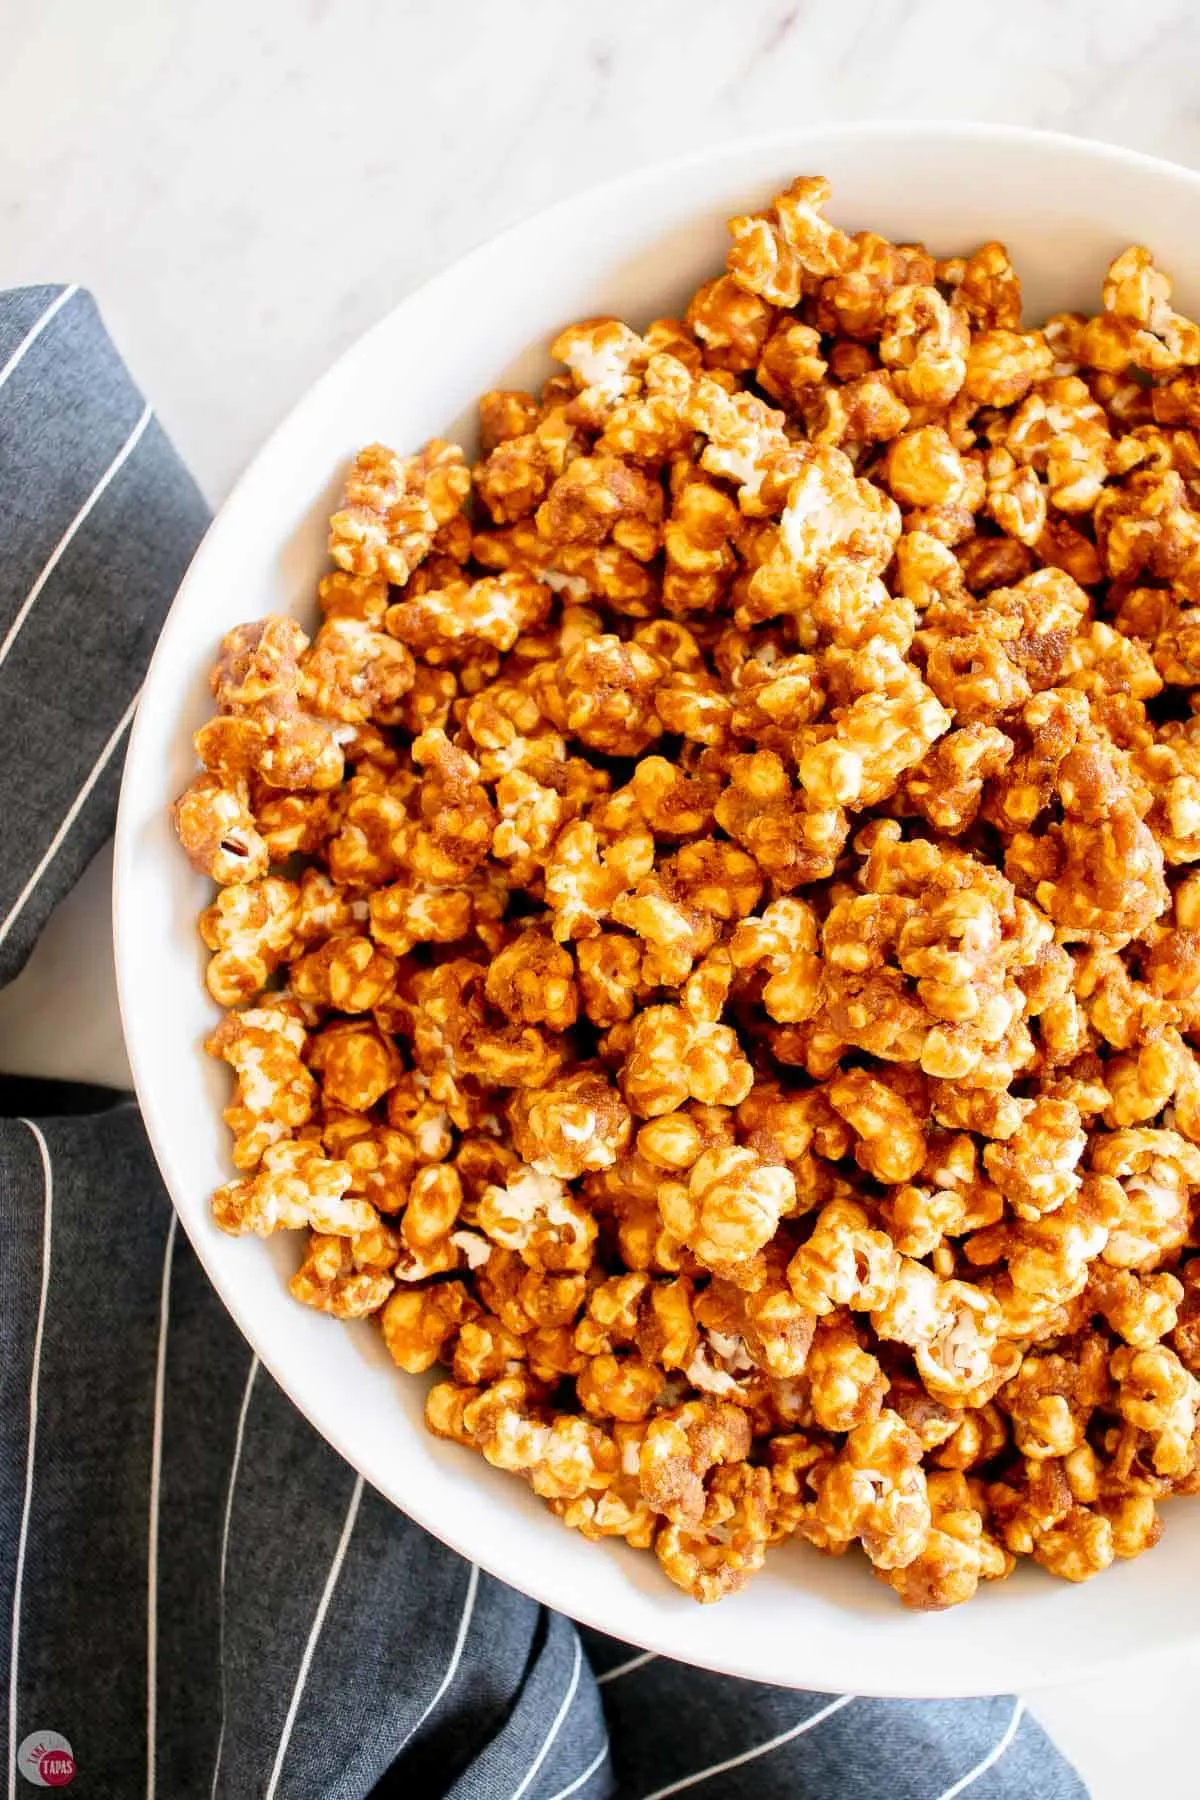 This IS IT! Seriously the BEST Easy Homemade Caramel Corn